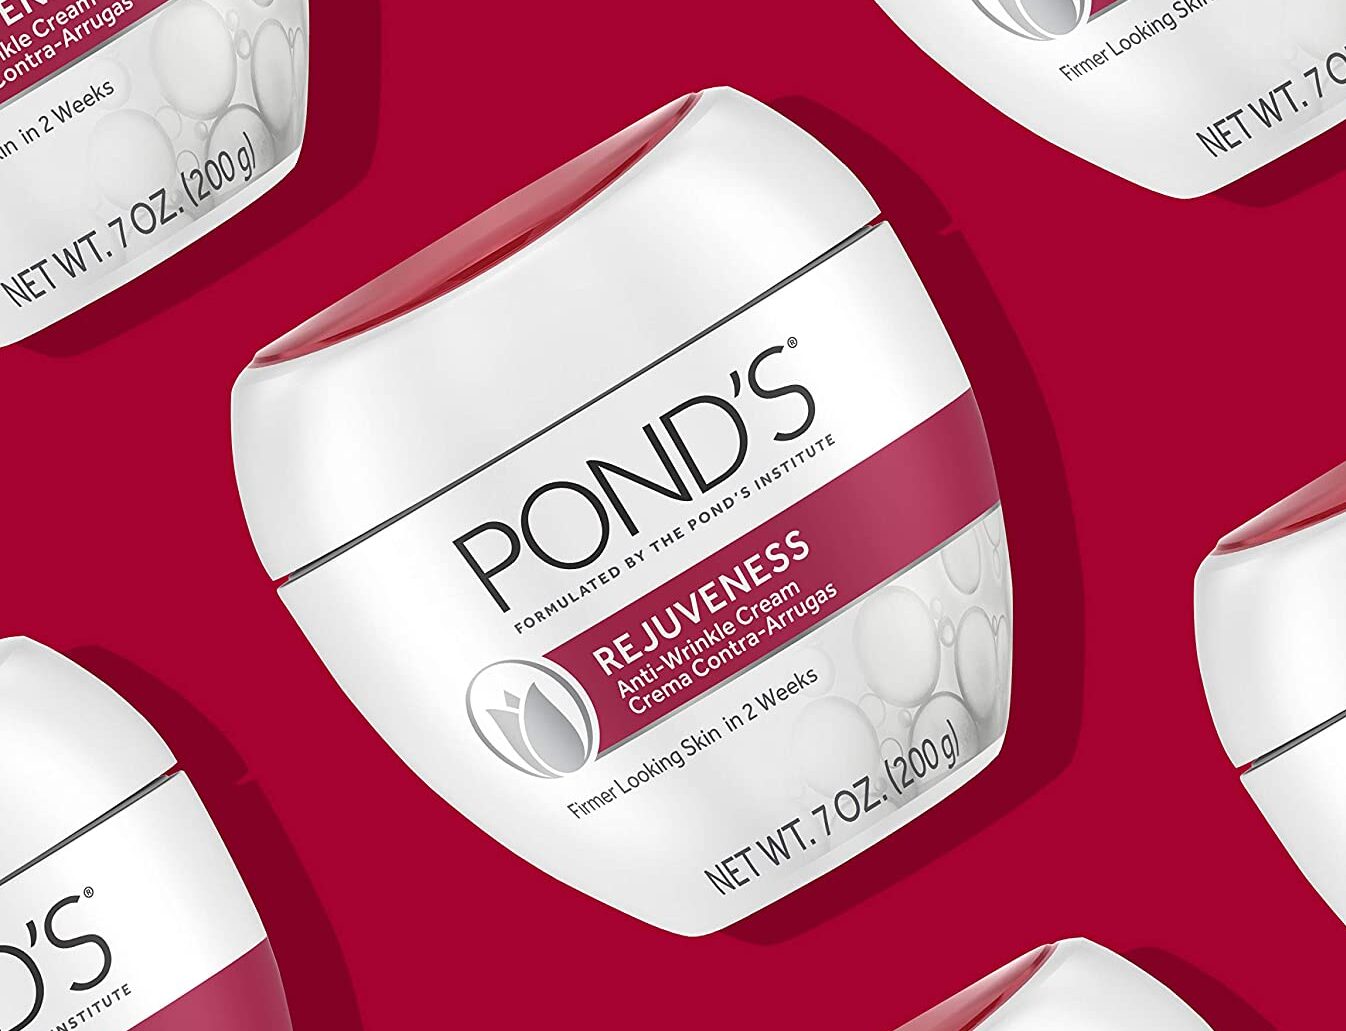 Say Goodbye to Fine lines and wrinkles using Pond’s Anti-Wrinkle and anti aging Face Cream (with visible results in just two weeks)